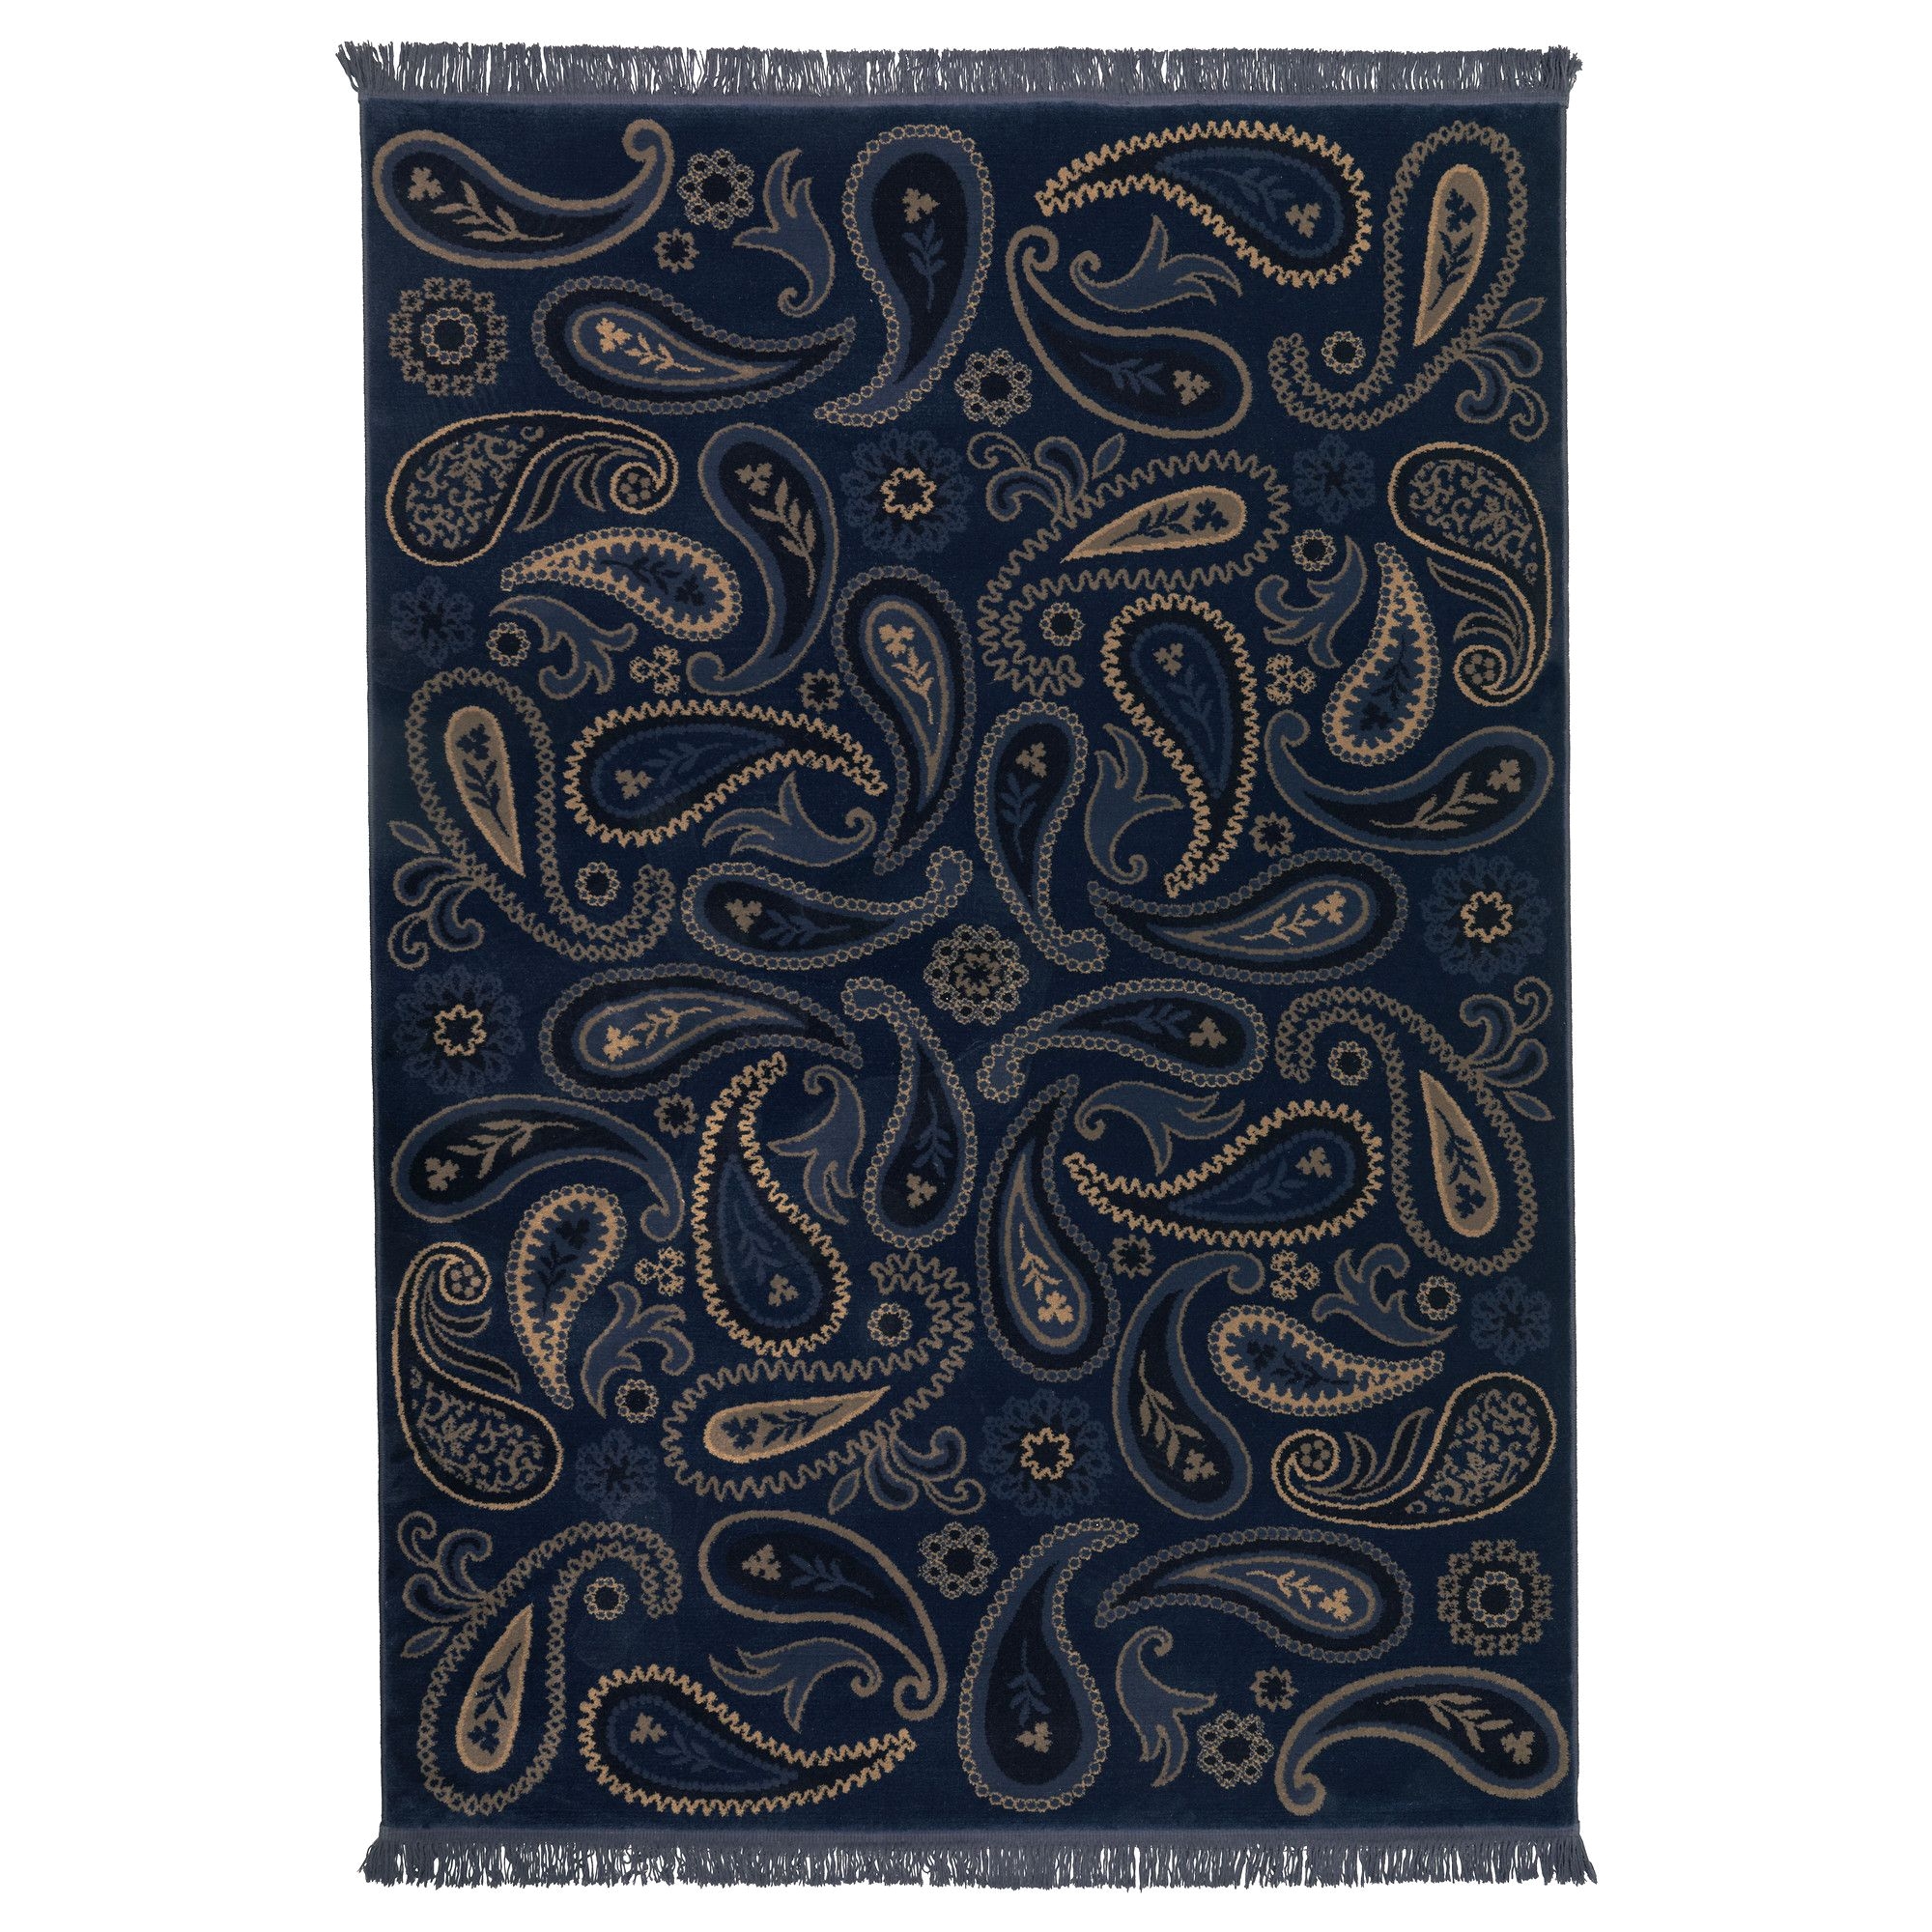 luv this paisley but not in blue vilsund rug low pile ikea